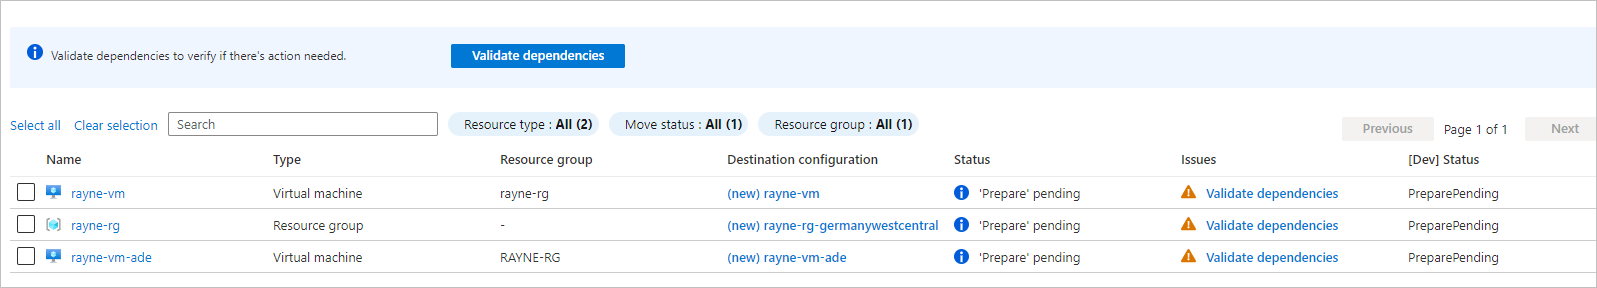 Screenshot of added resources with a 'Prepare pending' status.